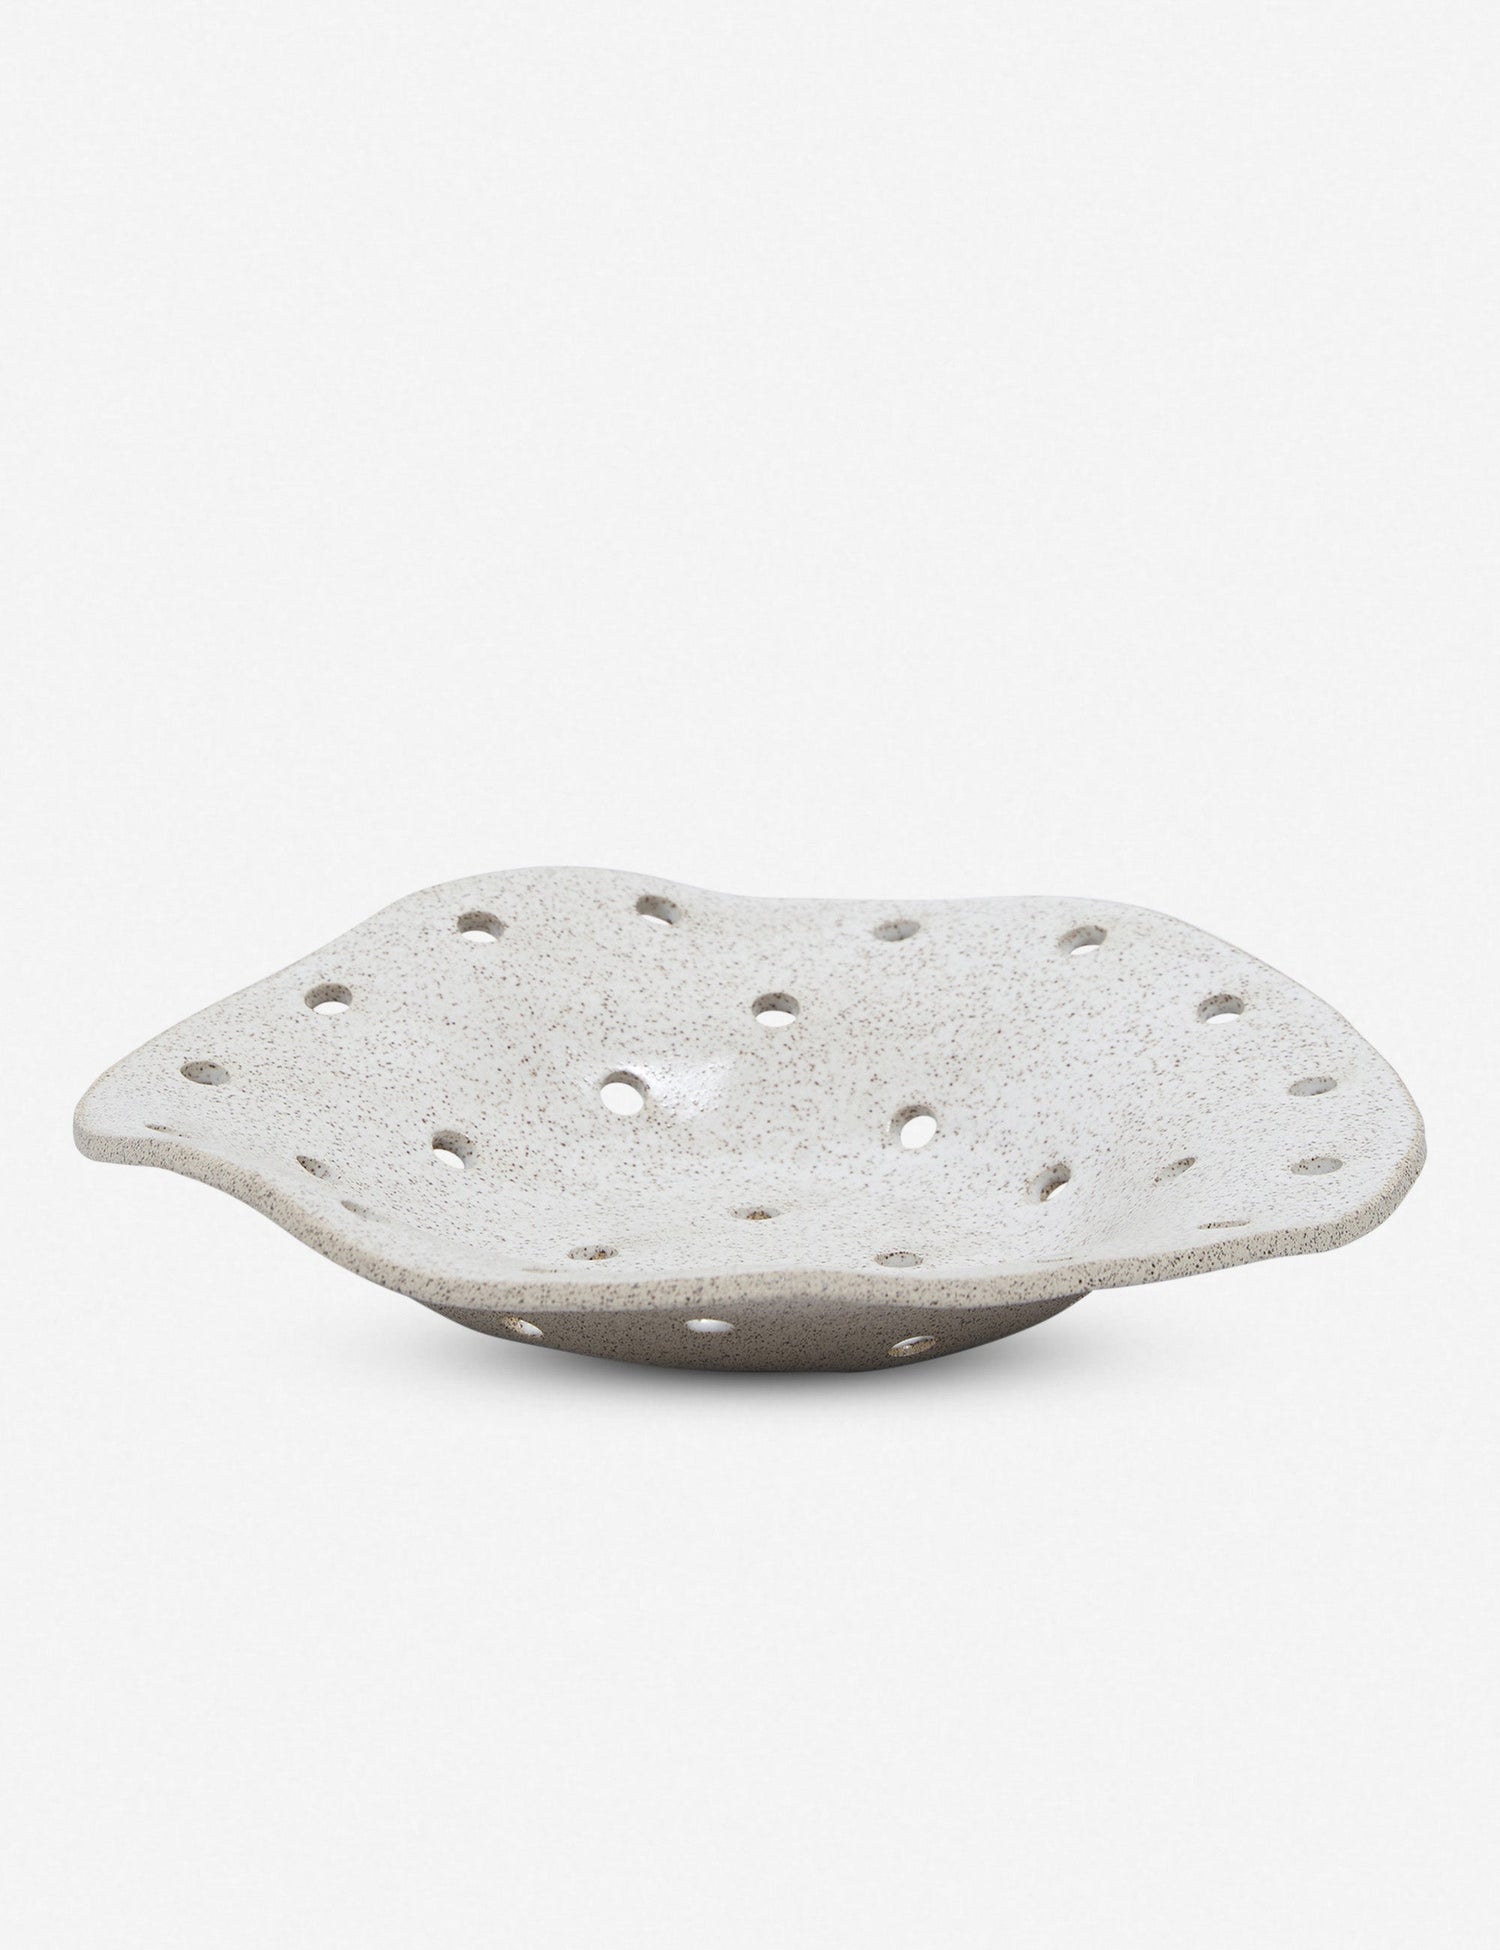 Virginia Sin's Bora berry bowl allows you to rinse and serve your berries in the very same bowl. Fun and functional, the perforated holes make for a graphic pattern that does the work of looking good and cleaning your berries, while it does. Handmade in Brooklyn, NY.